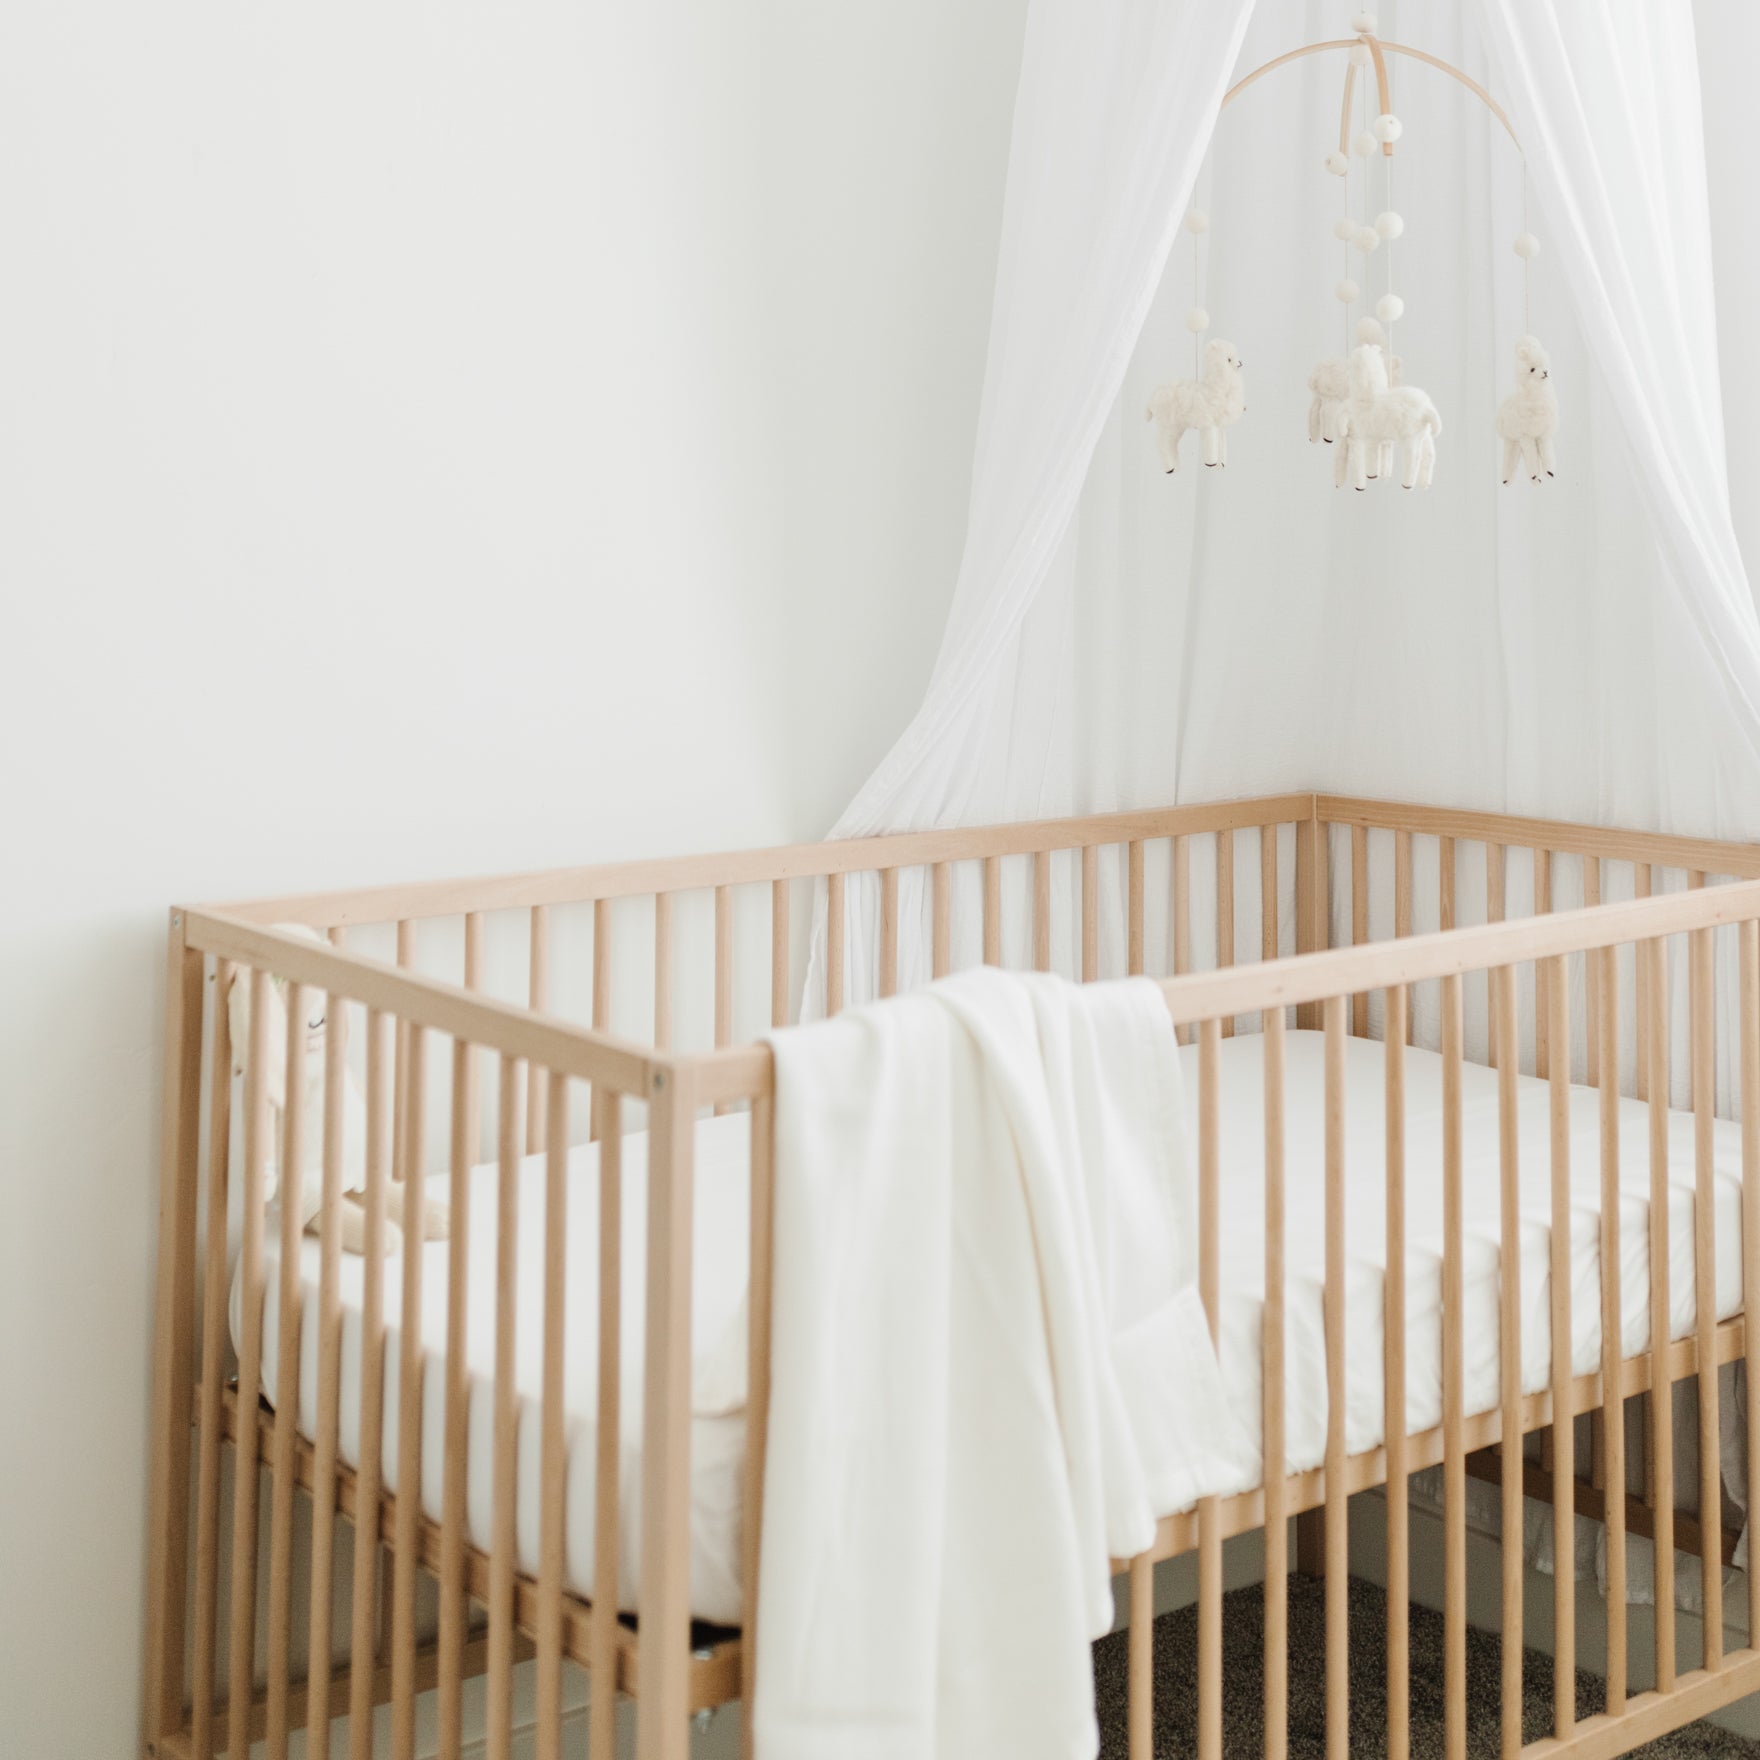 Wooden crib with white baby blanket draped over the side